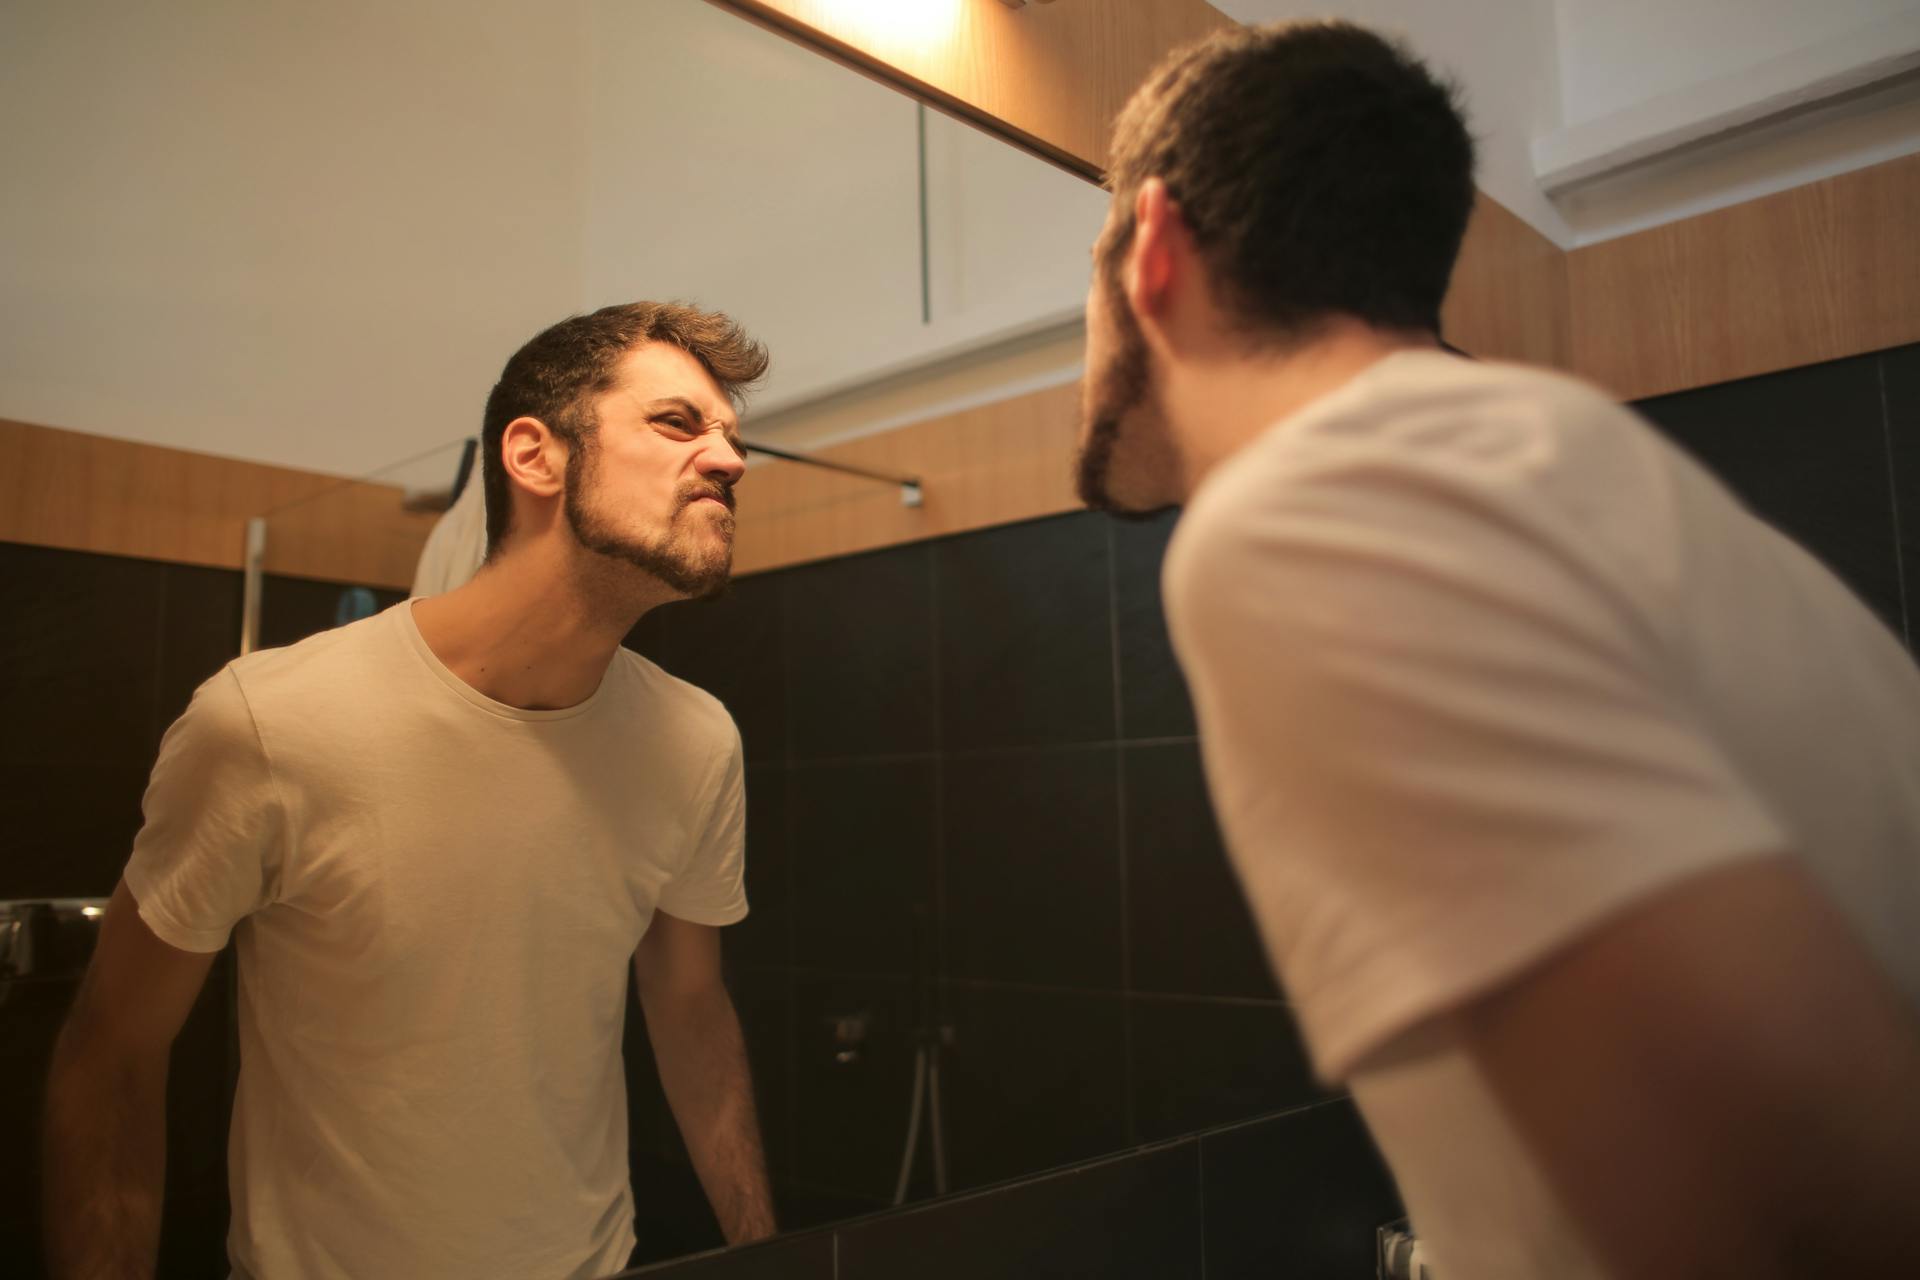 A man looking in the mirror | Source: Pexels